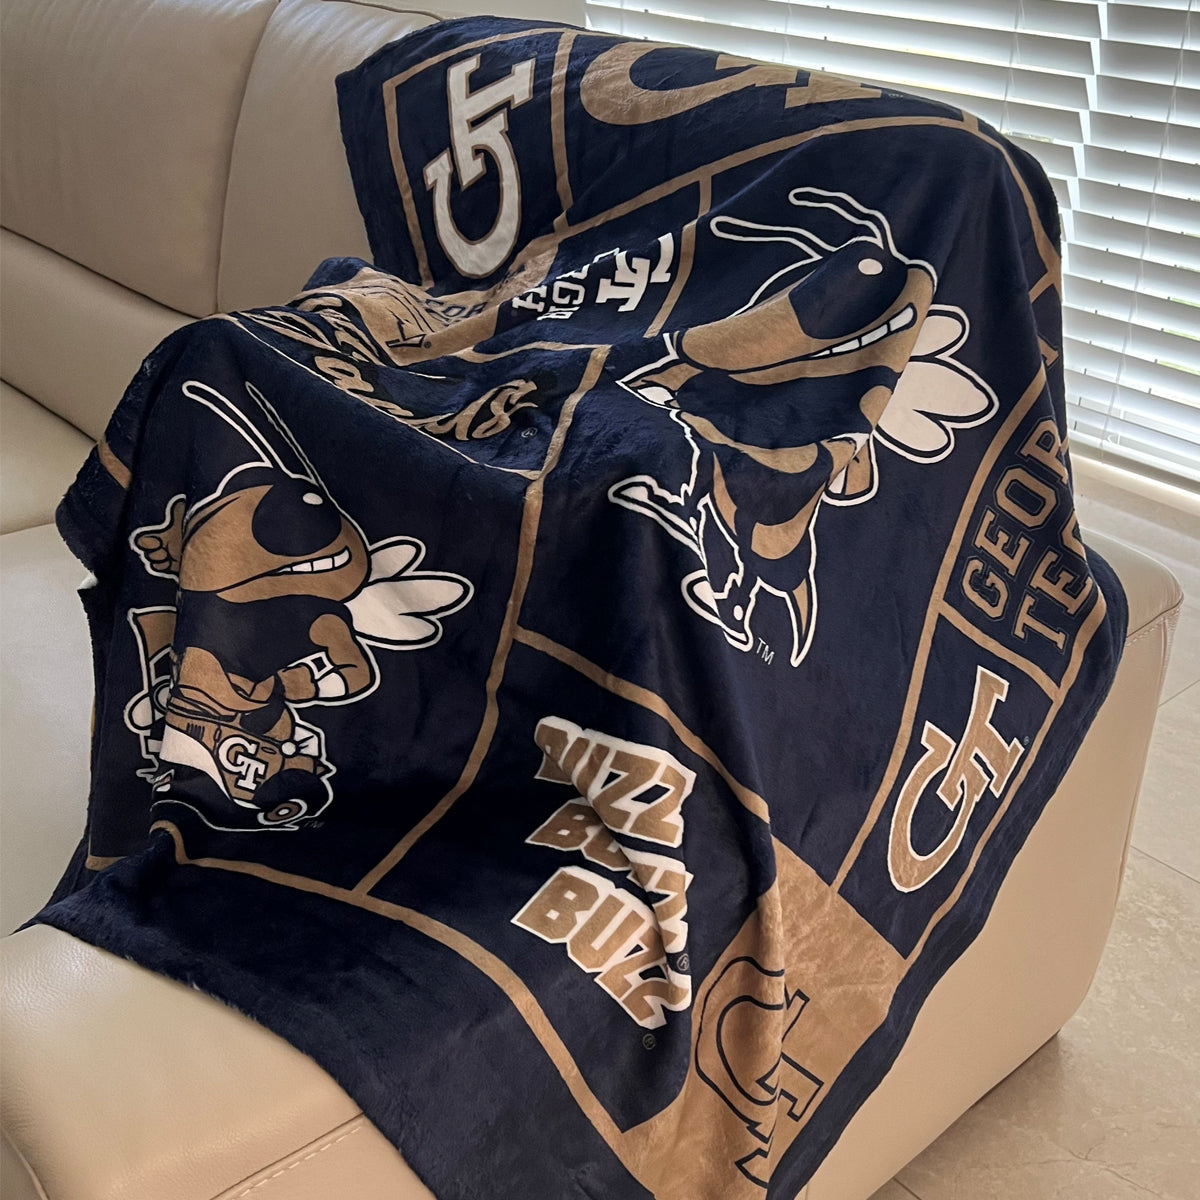 Canisius College Golden Griffins Kids Game Day Blue Plush Soft Minky Blanket 36 x 48 Mascot